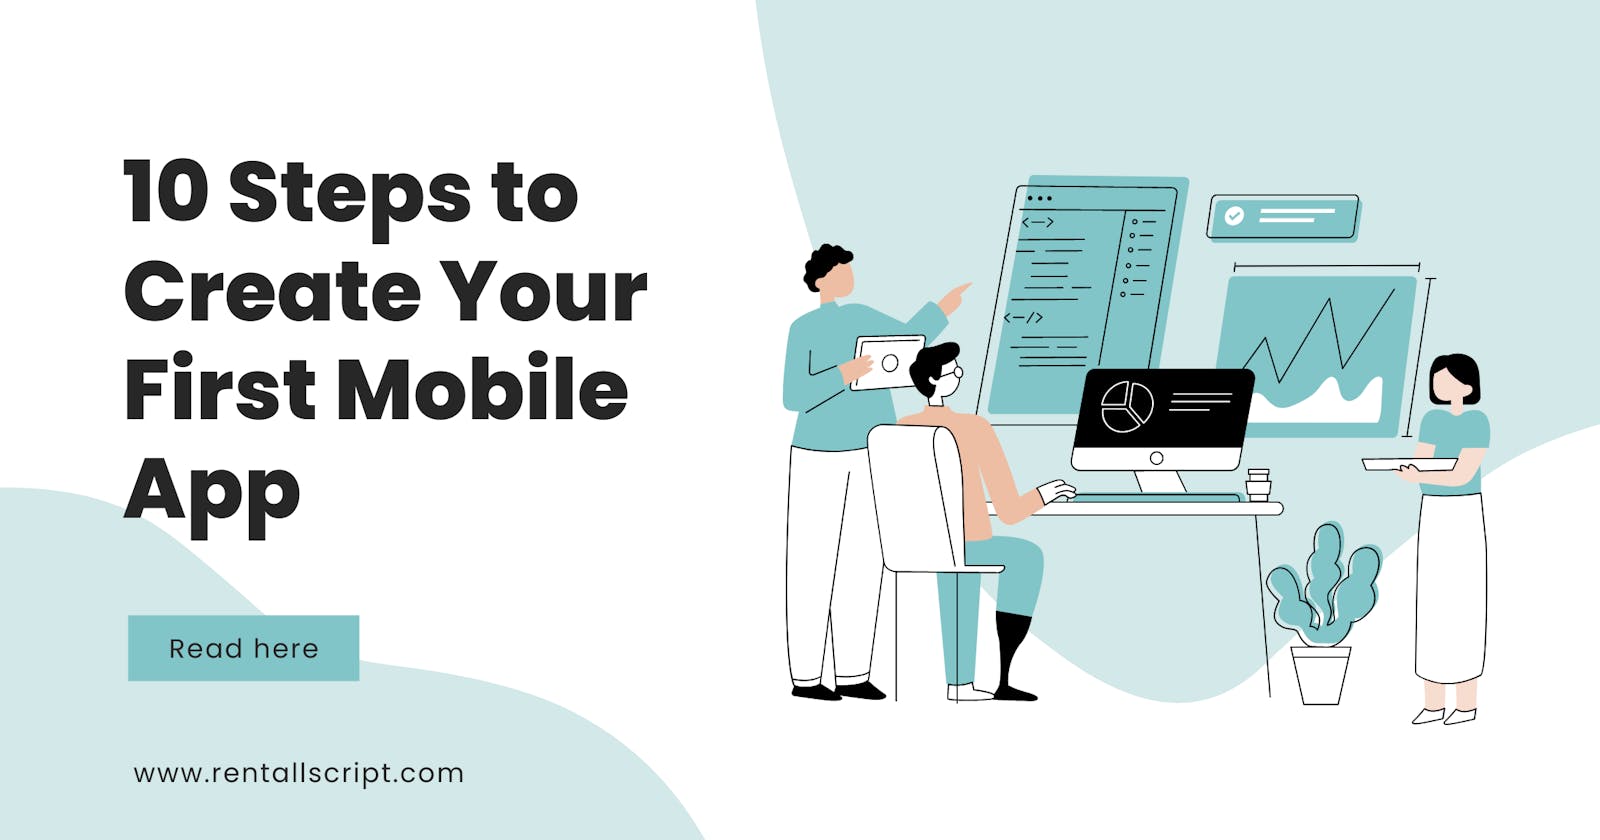 10 Steps to Create Your First Mobile App